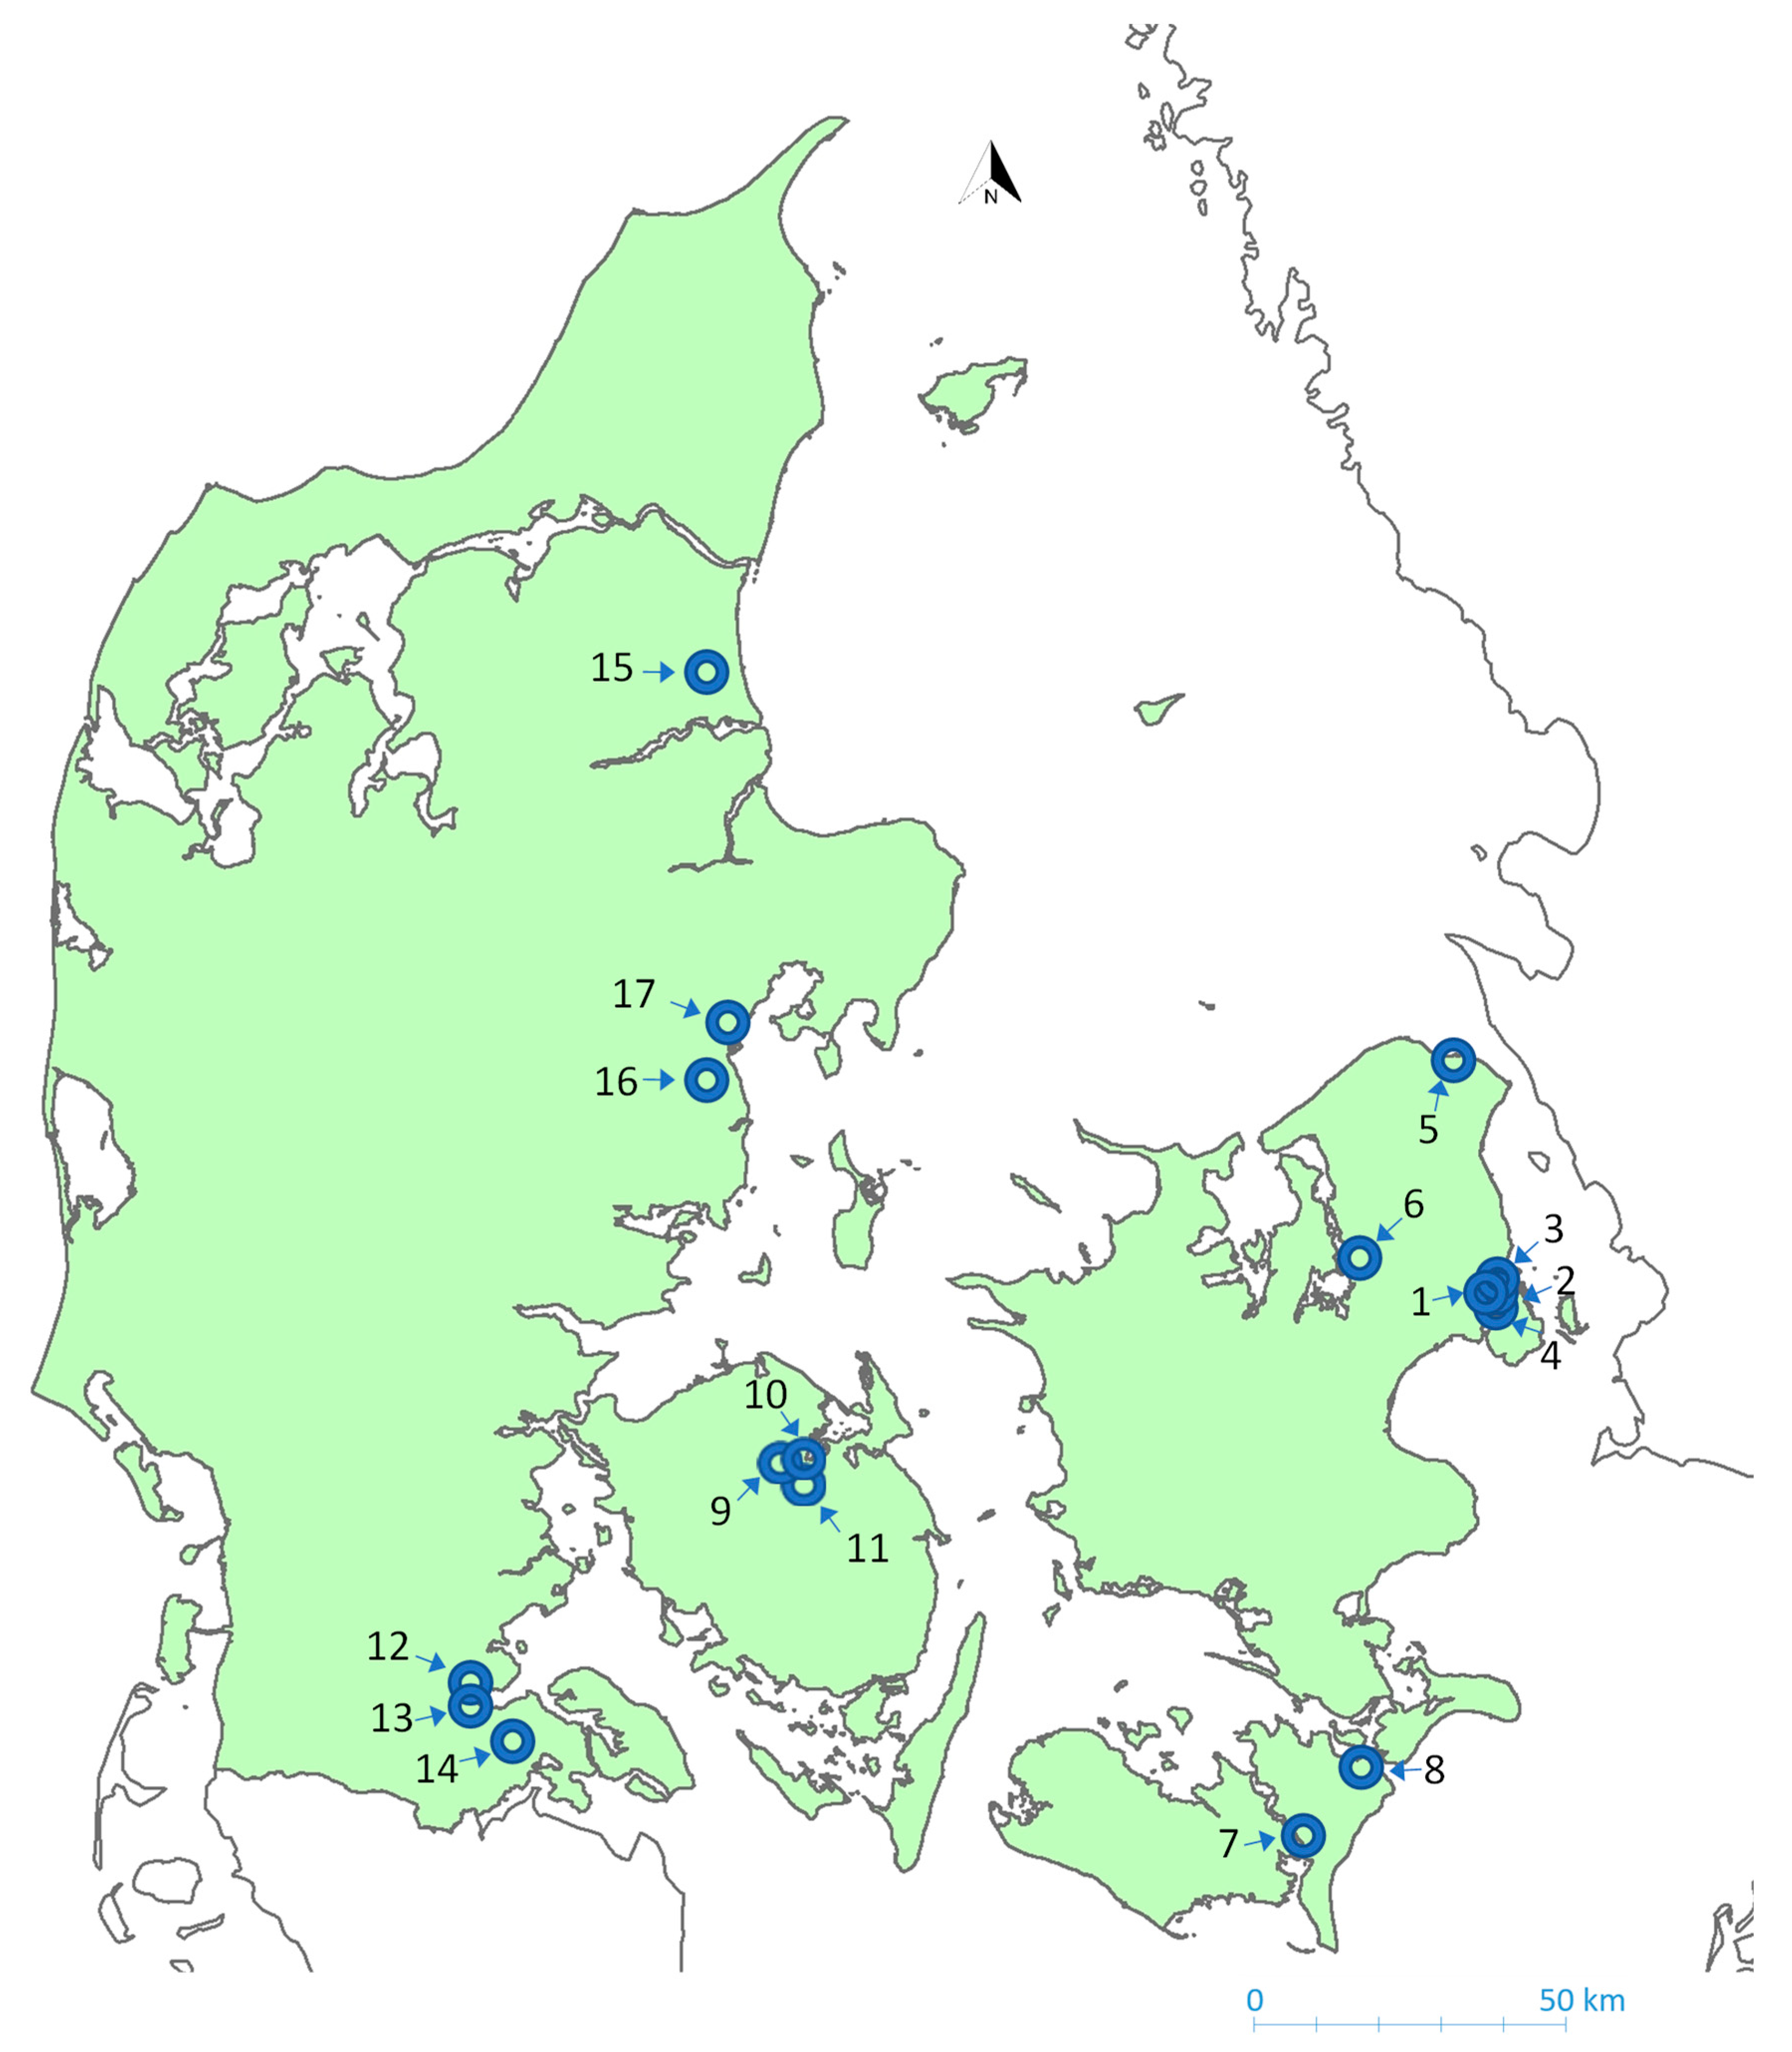 Water | Free Full-Text | A Study of Microplastic Particles in Danish Tap  Water | HTML